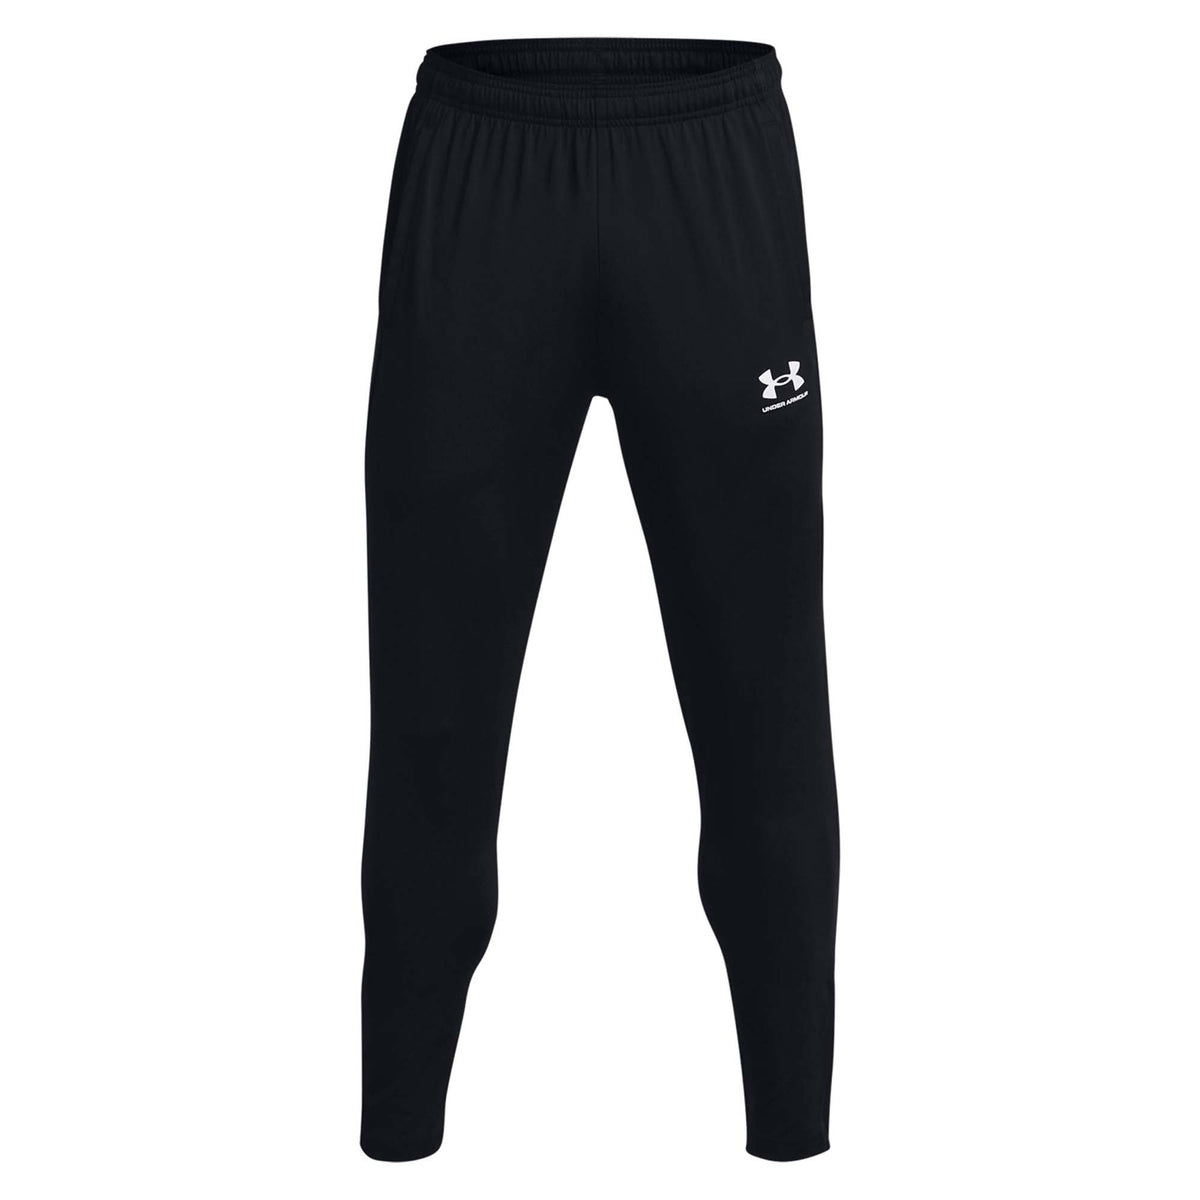 Under Armour Challenger Mens Training Pant